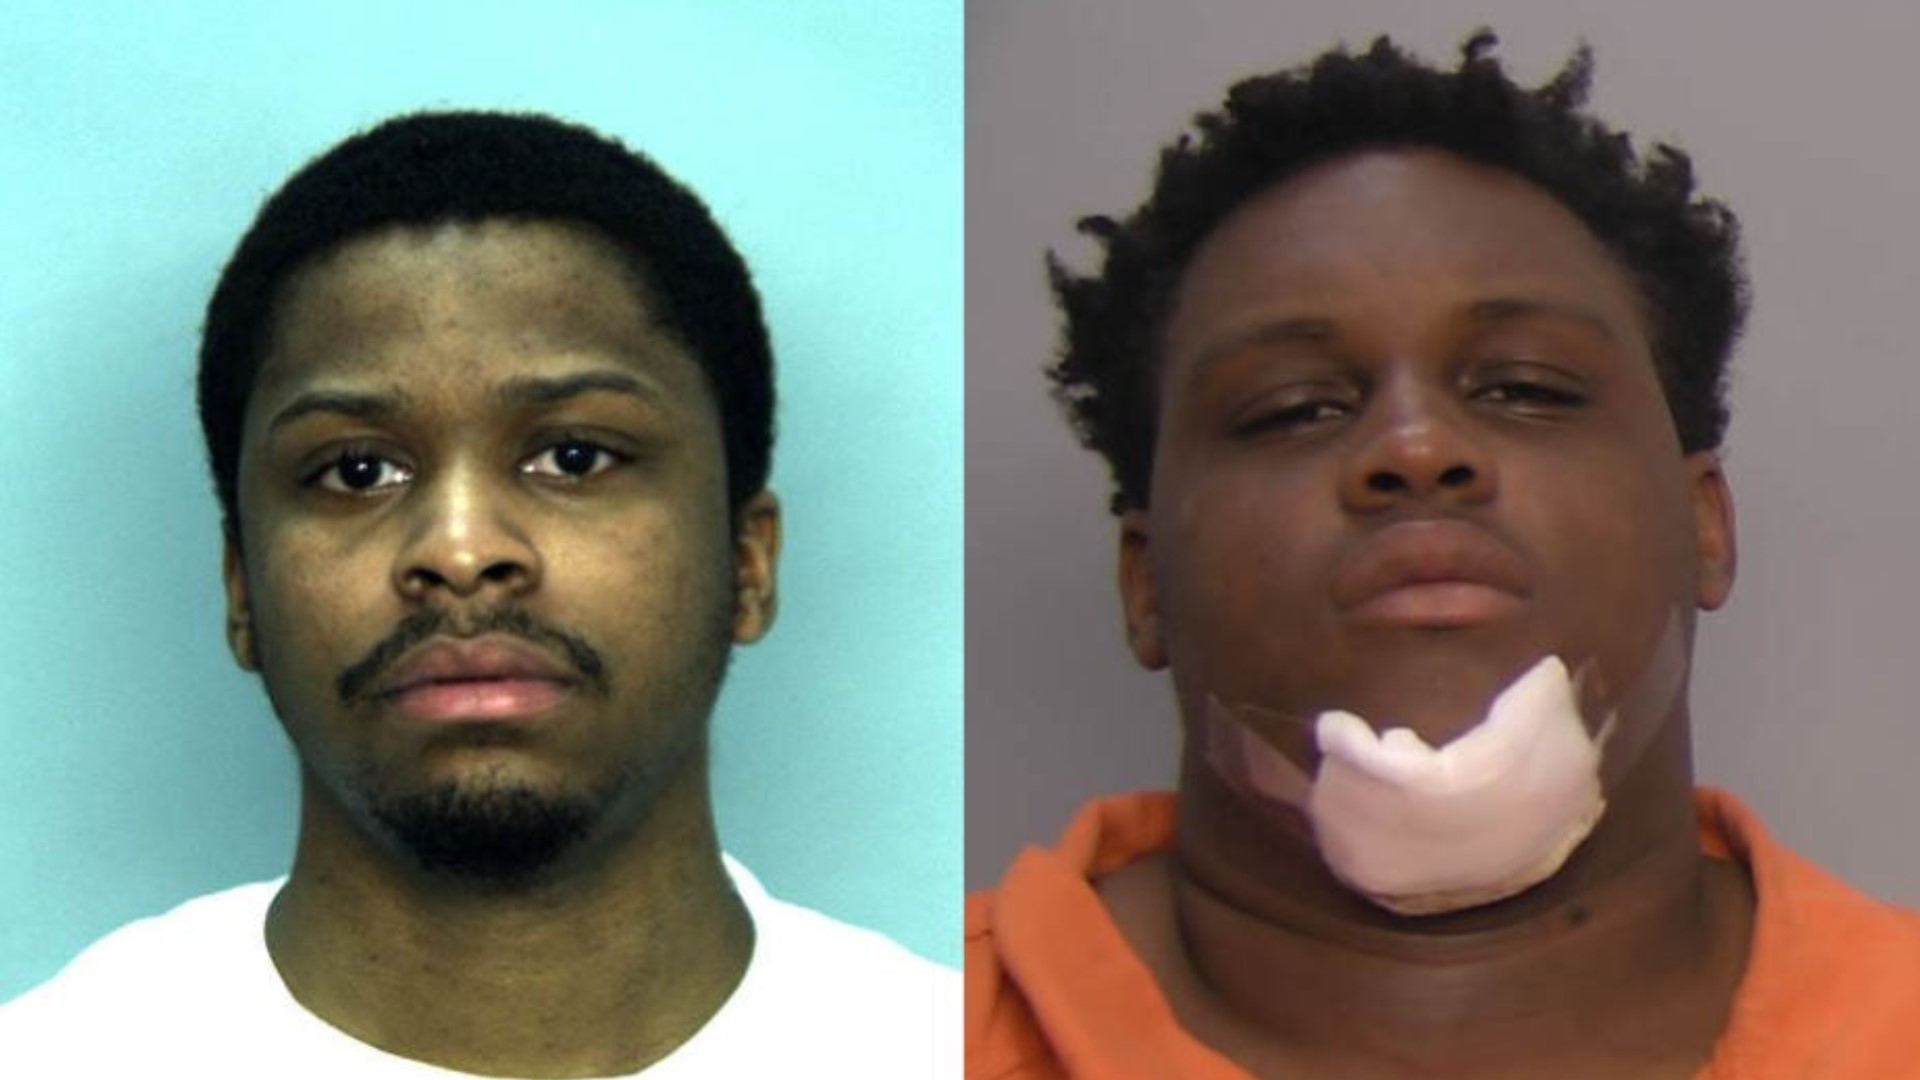 Police arrested two men early Wednesday morning after two separate police pursuits in Chesapeake.